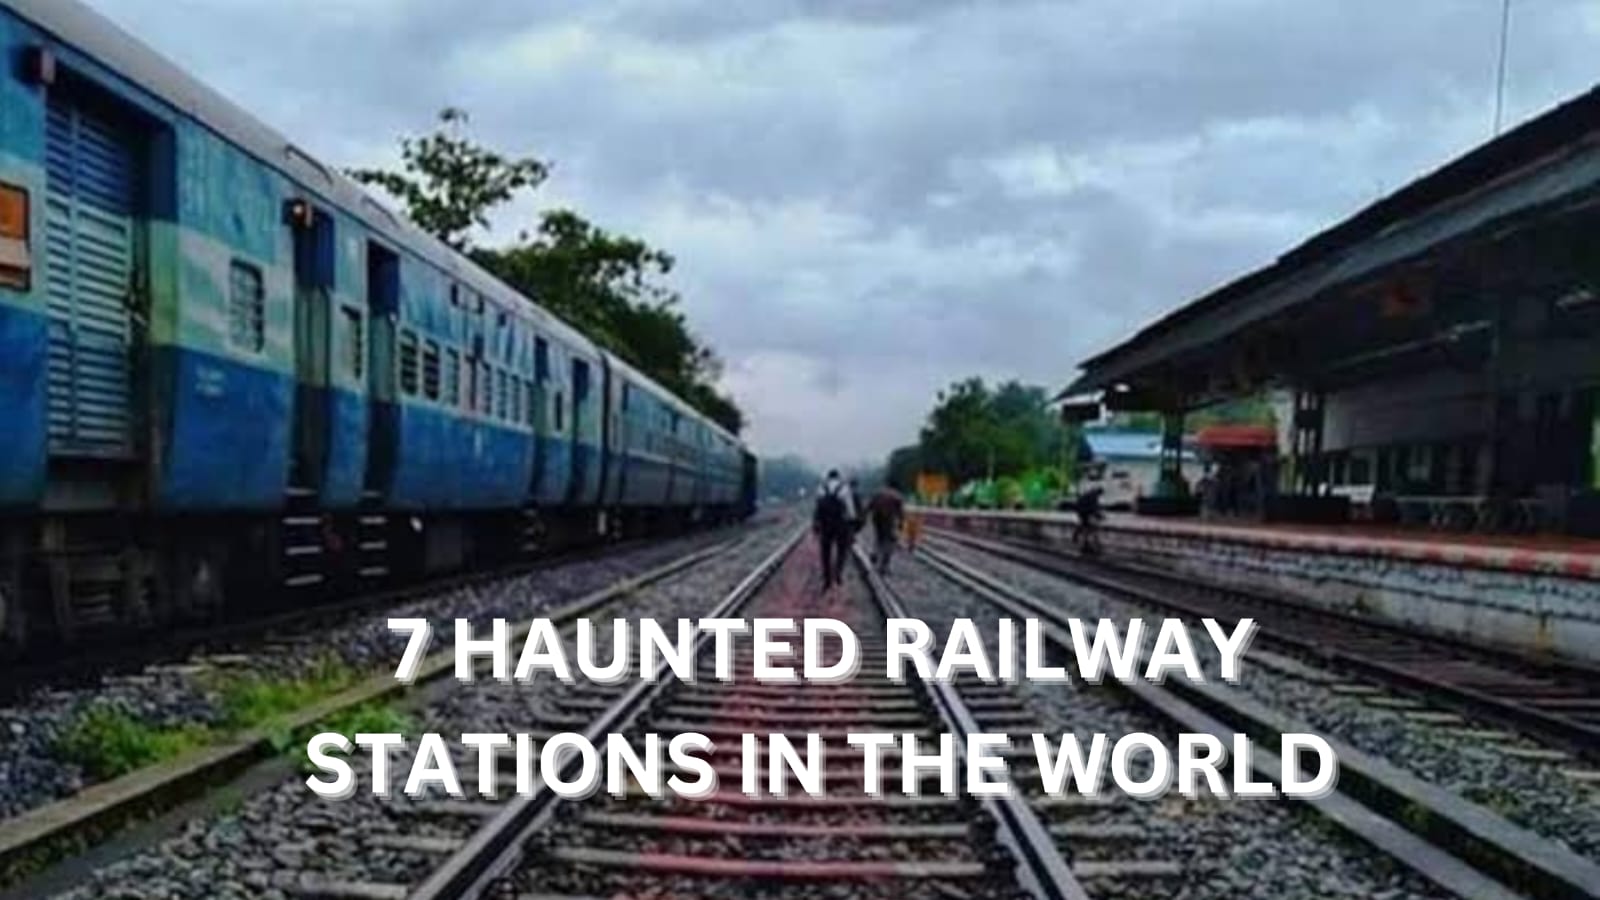 7 HAUNTED RAILWAY STATIONS IN THE WORLD